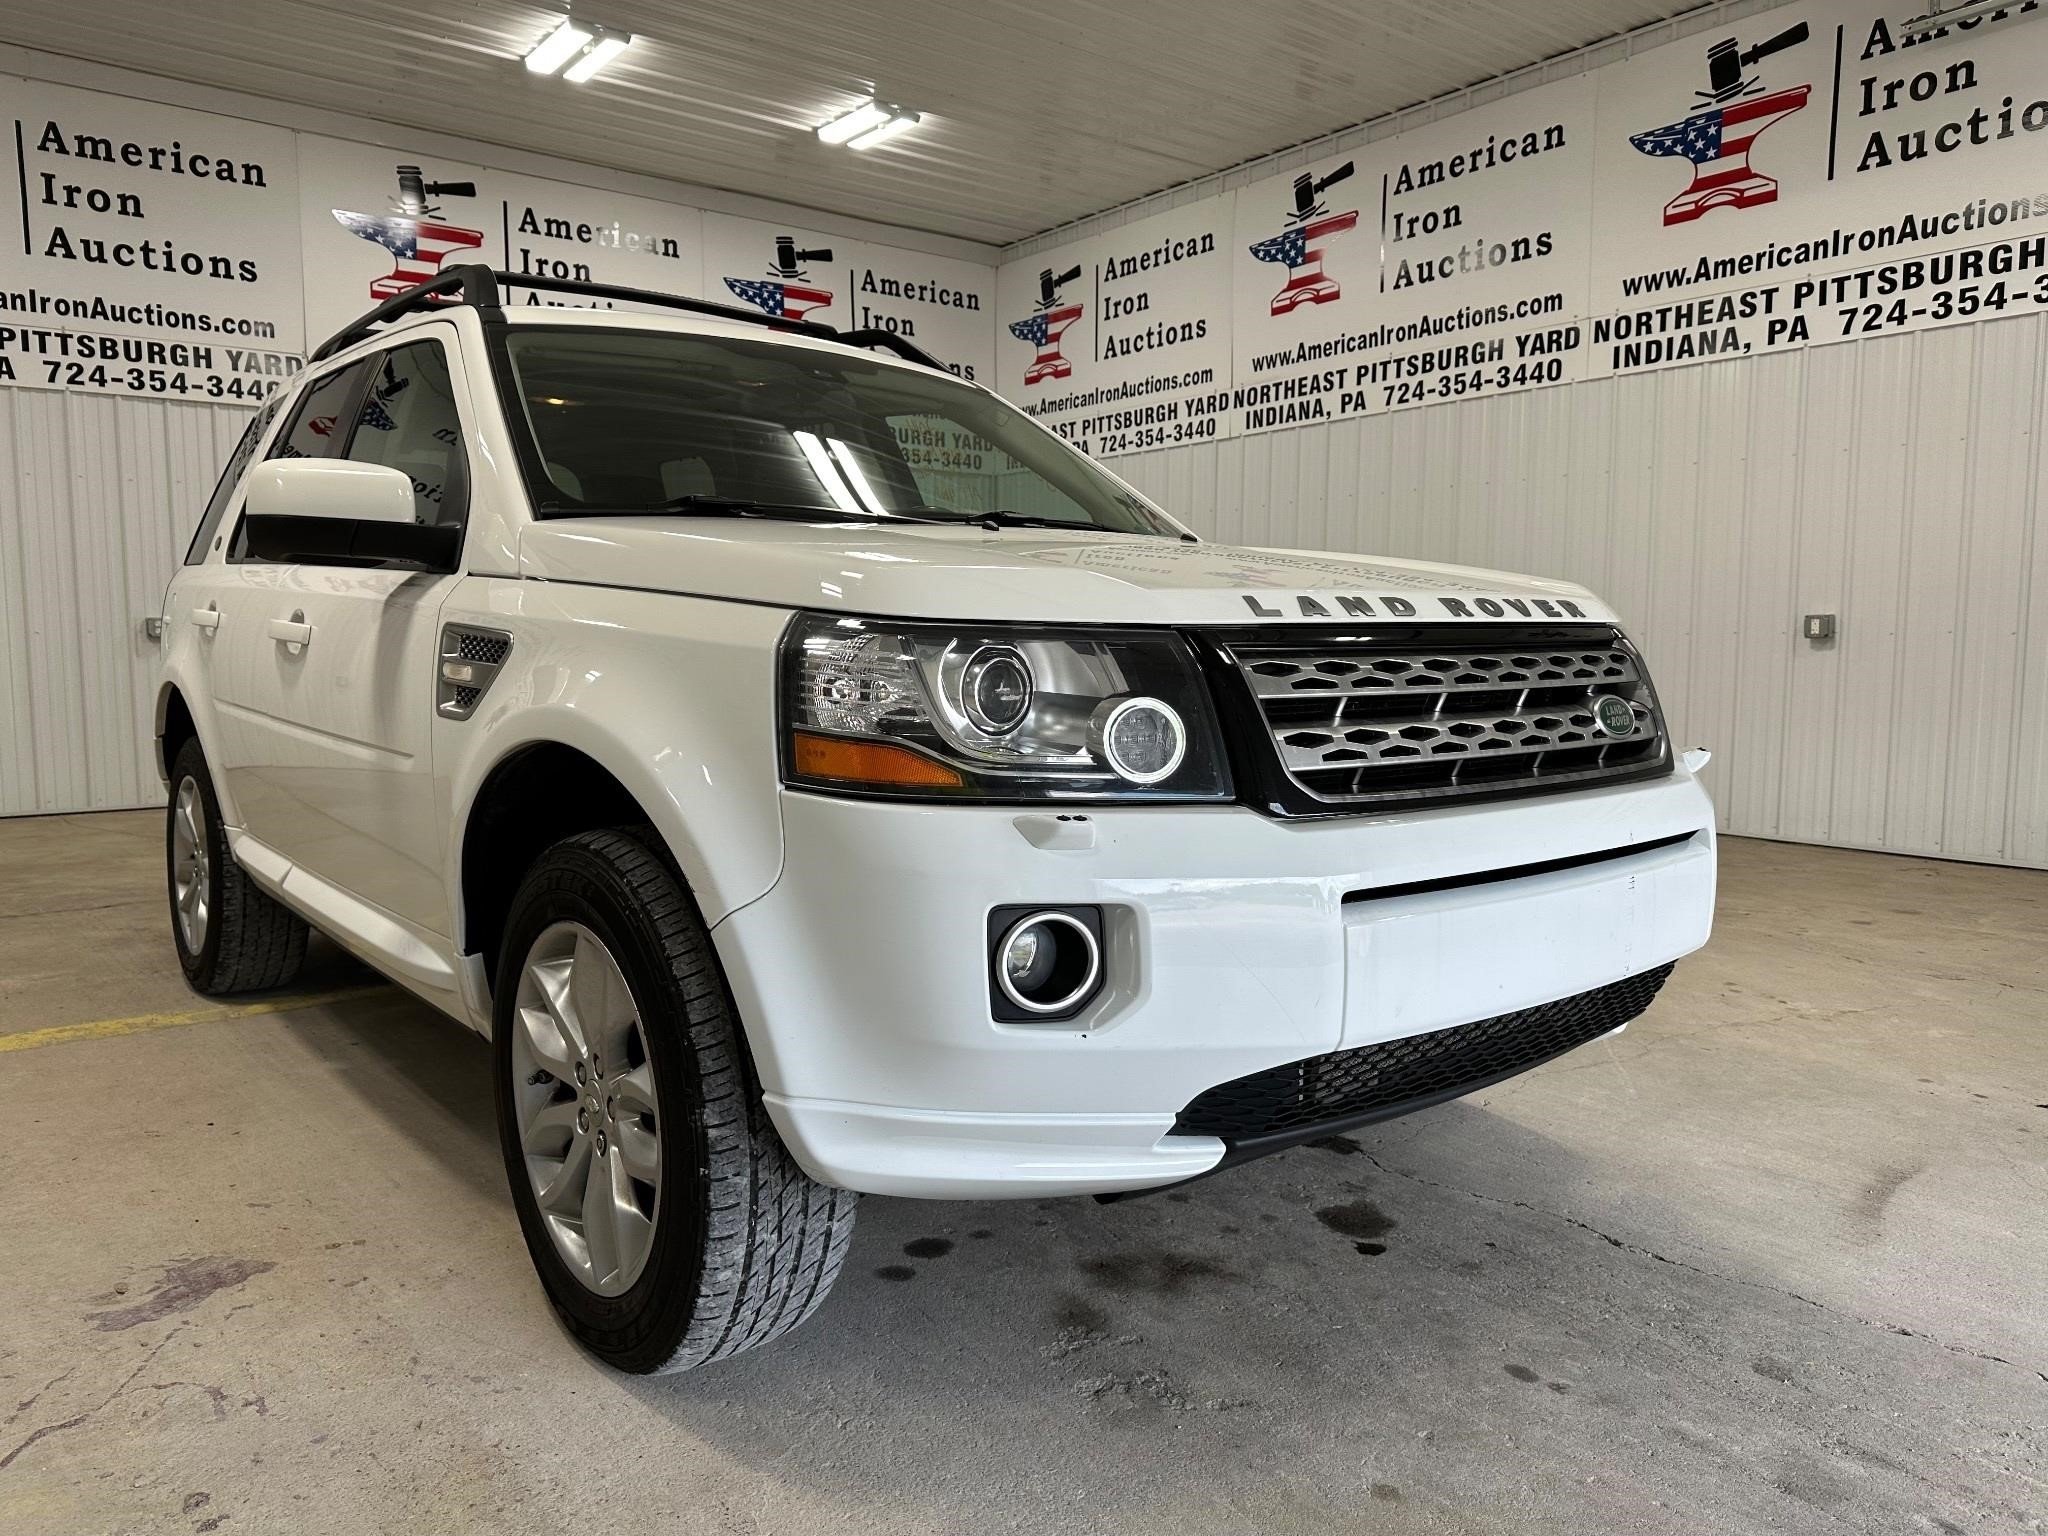 2014 Land Rover LR2 HSE SUV-Titled-NO RESERVE